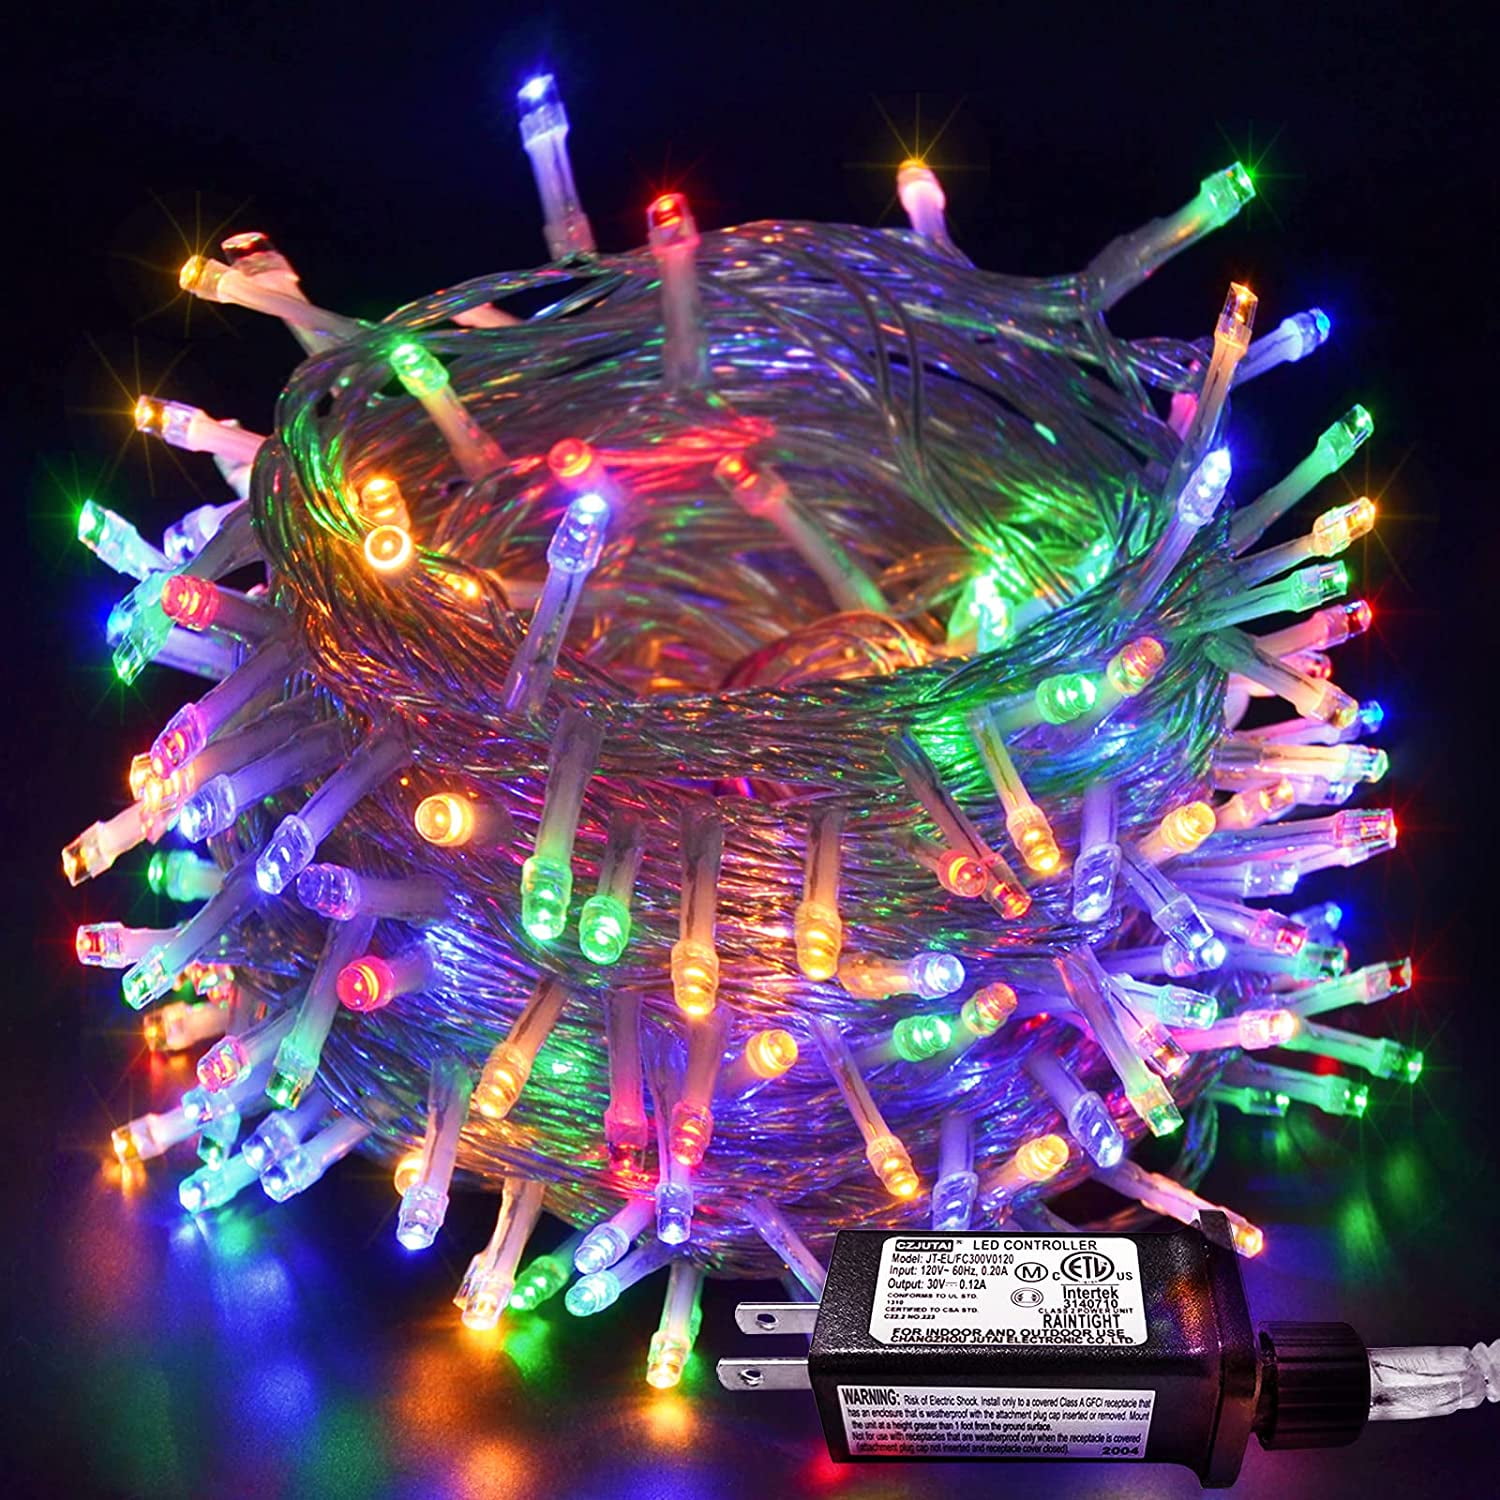 Christmas Tree decoration LED waterproof lights for party string indoor outdoor 